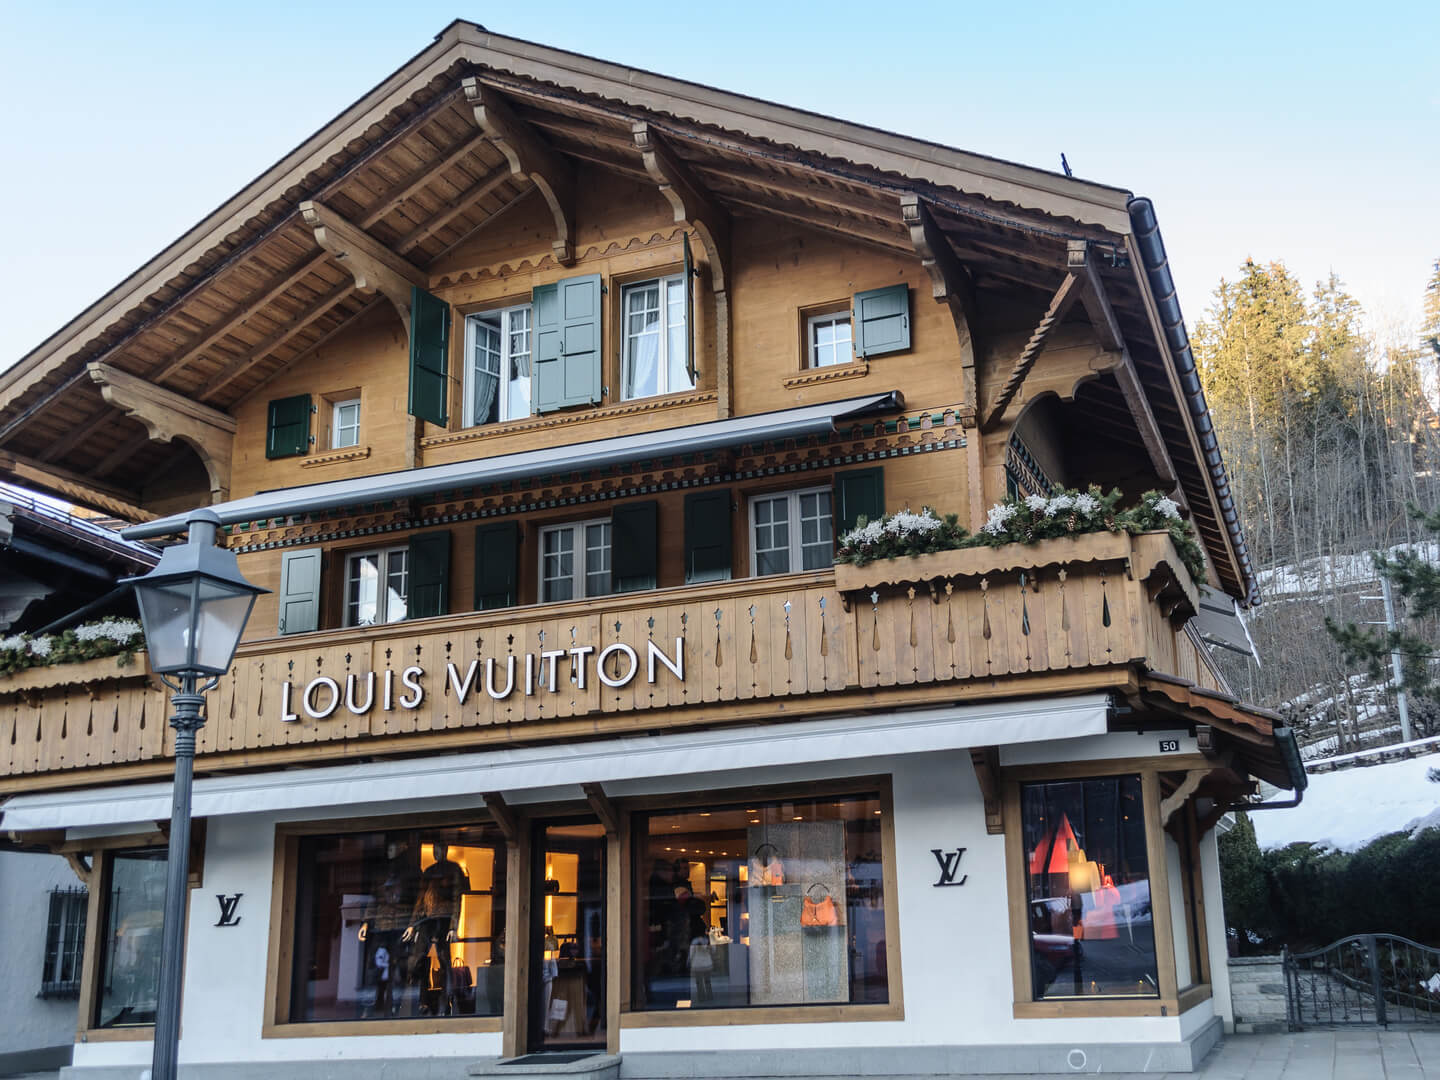 Gusted, Switzerland: 03012015: Tourism in Gstaad , Switzerland.Gstaad is a village in the German-speaking section of the Canton of Bern in southwestern Switzerland.